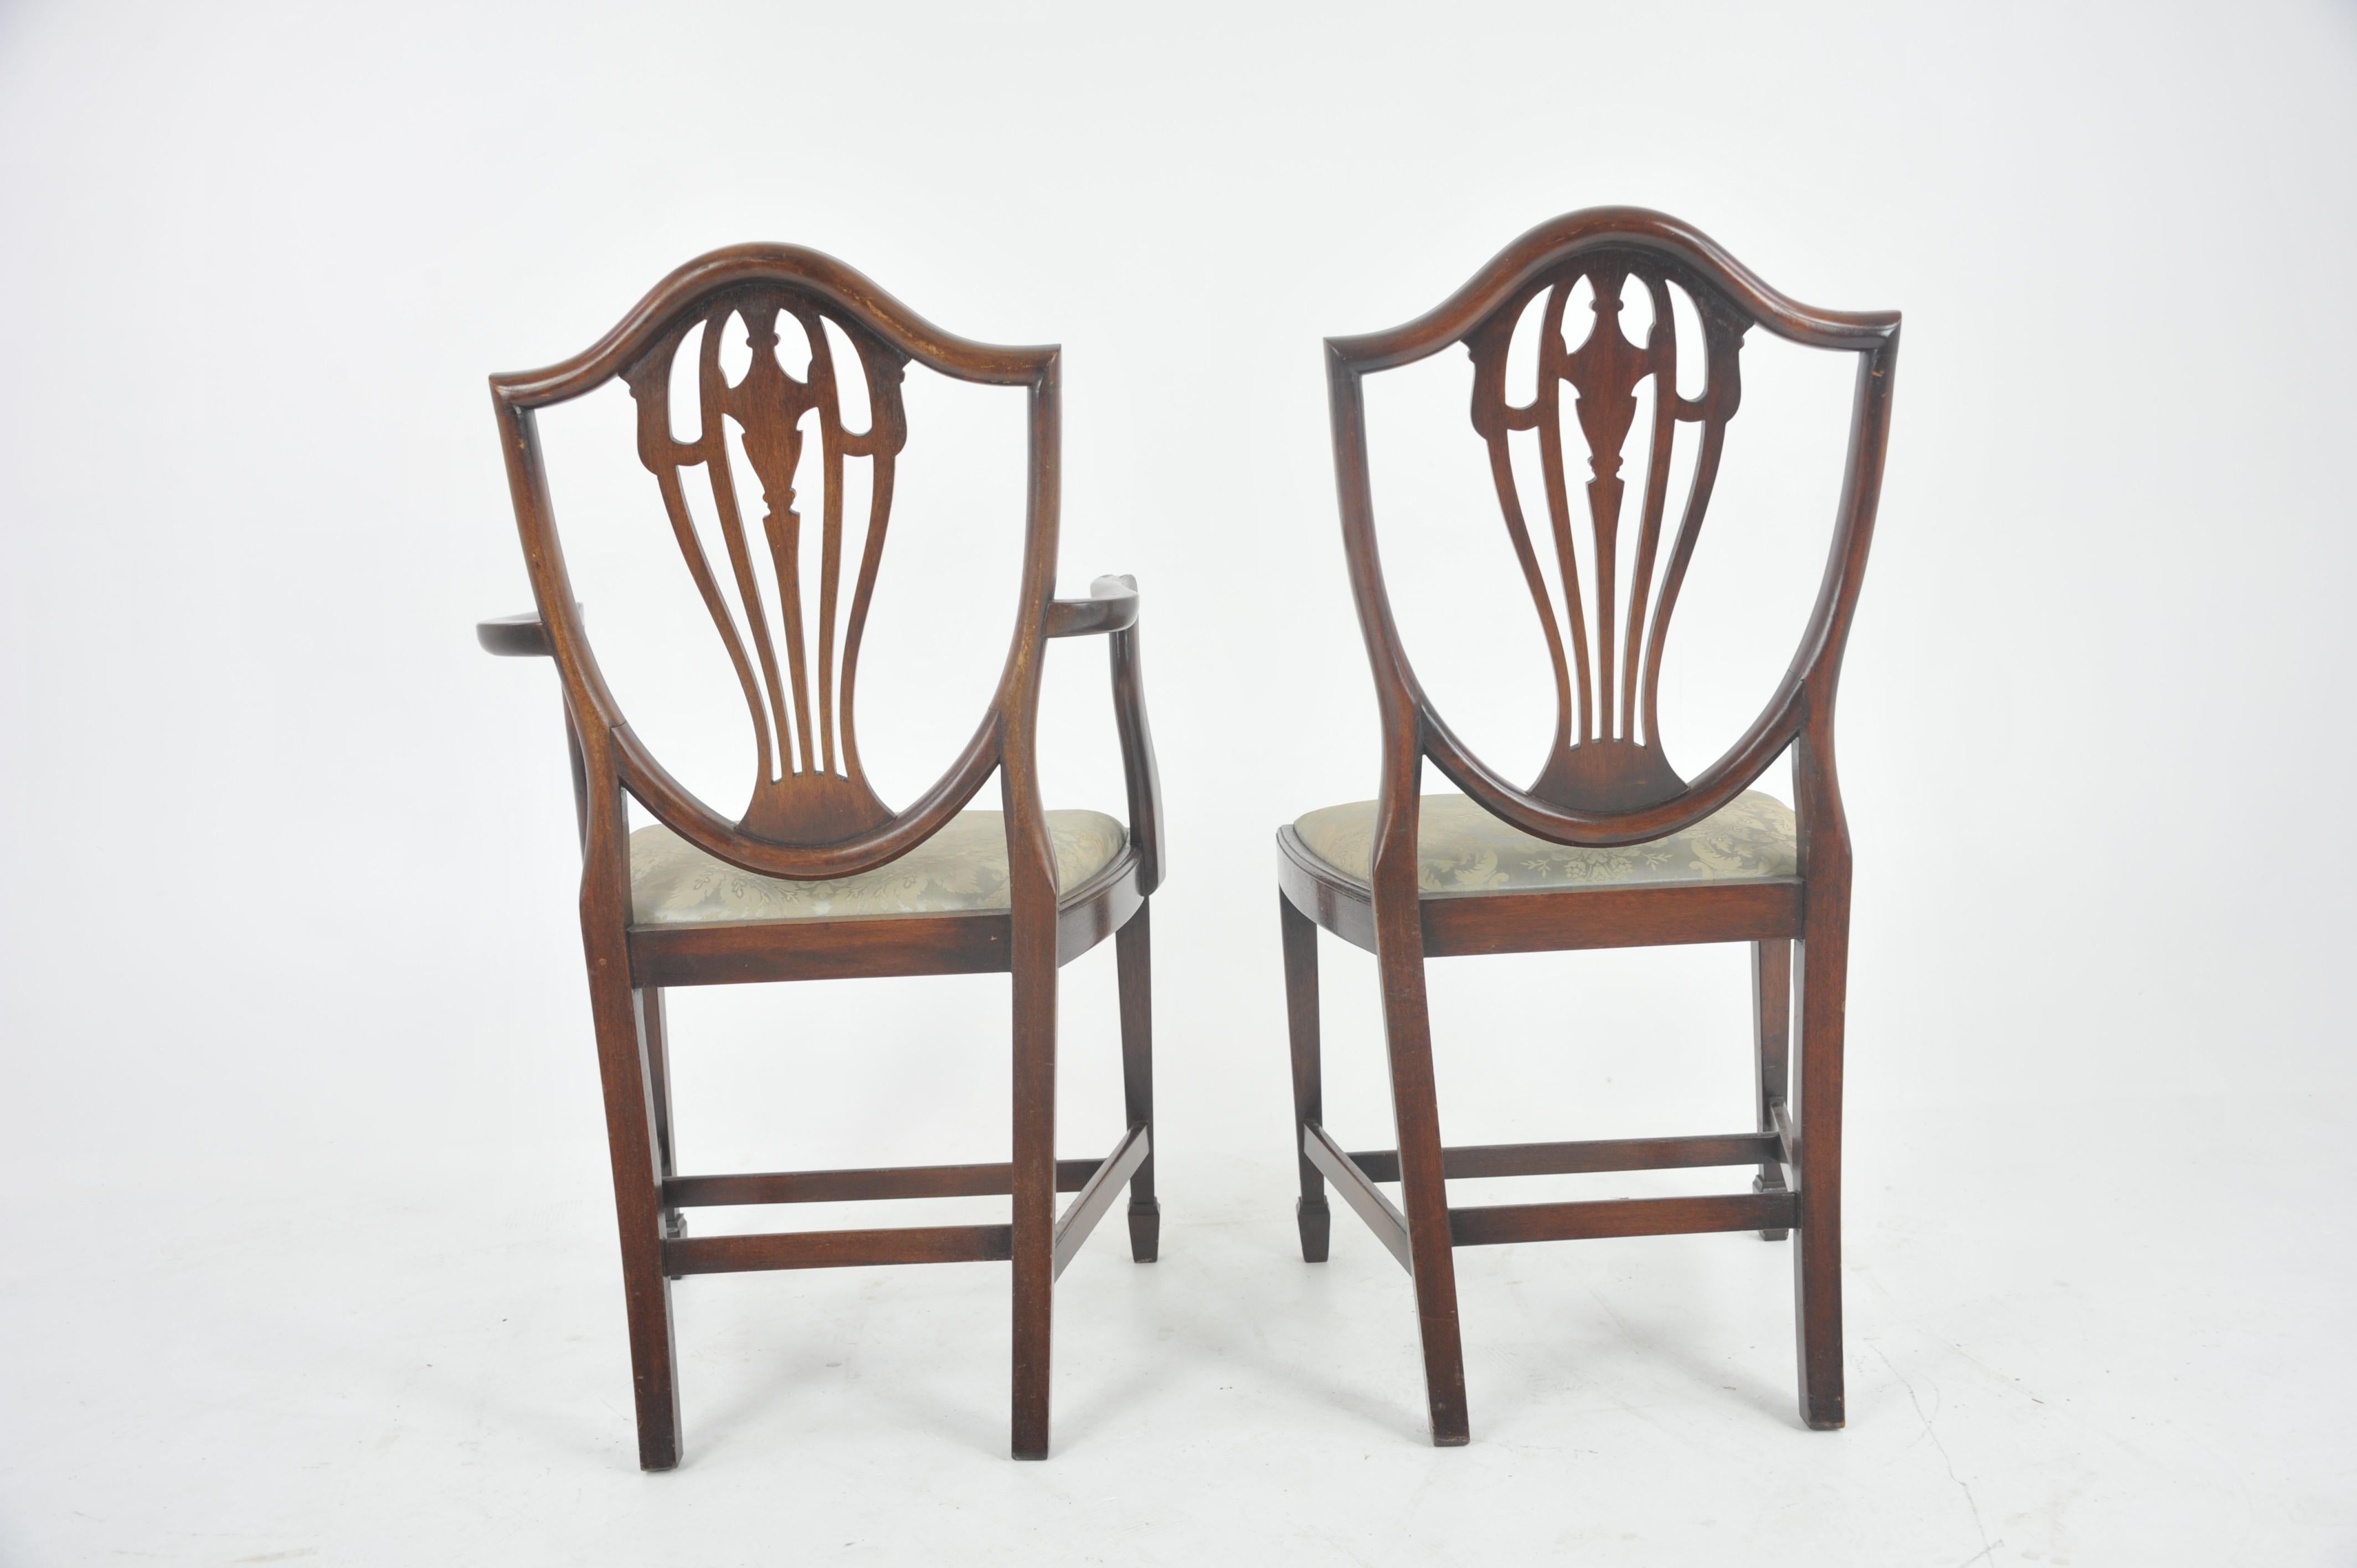 Twelve Dining Chairs, Antique Dining Chairs, Hepplewhite Chairs, Walnut, B1071 1